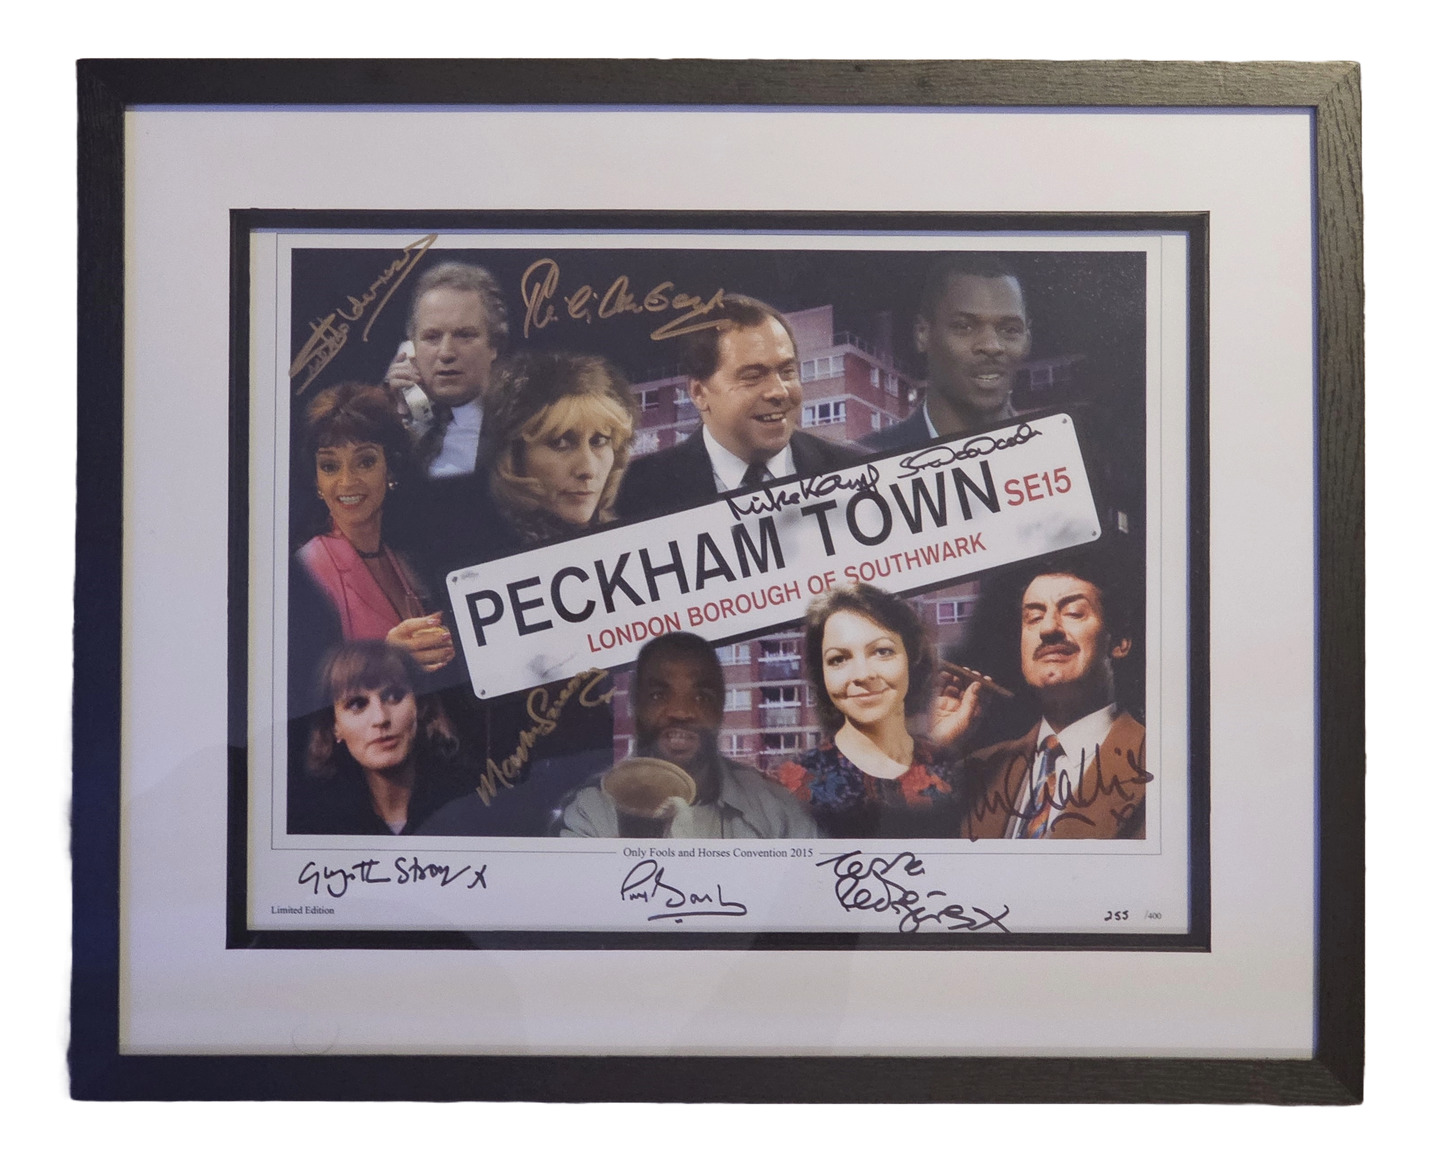 Only Fools and Horses: Multi Cast Framed and Signed